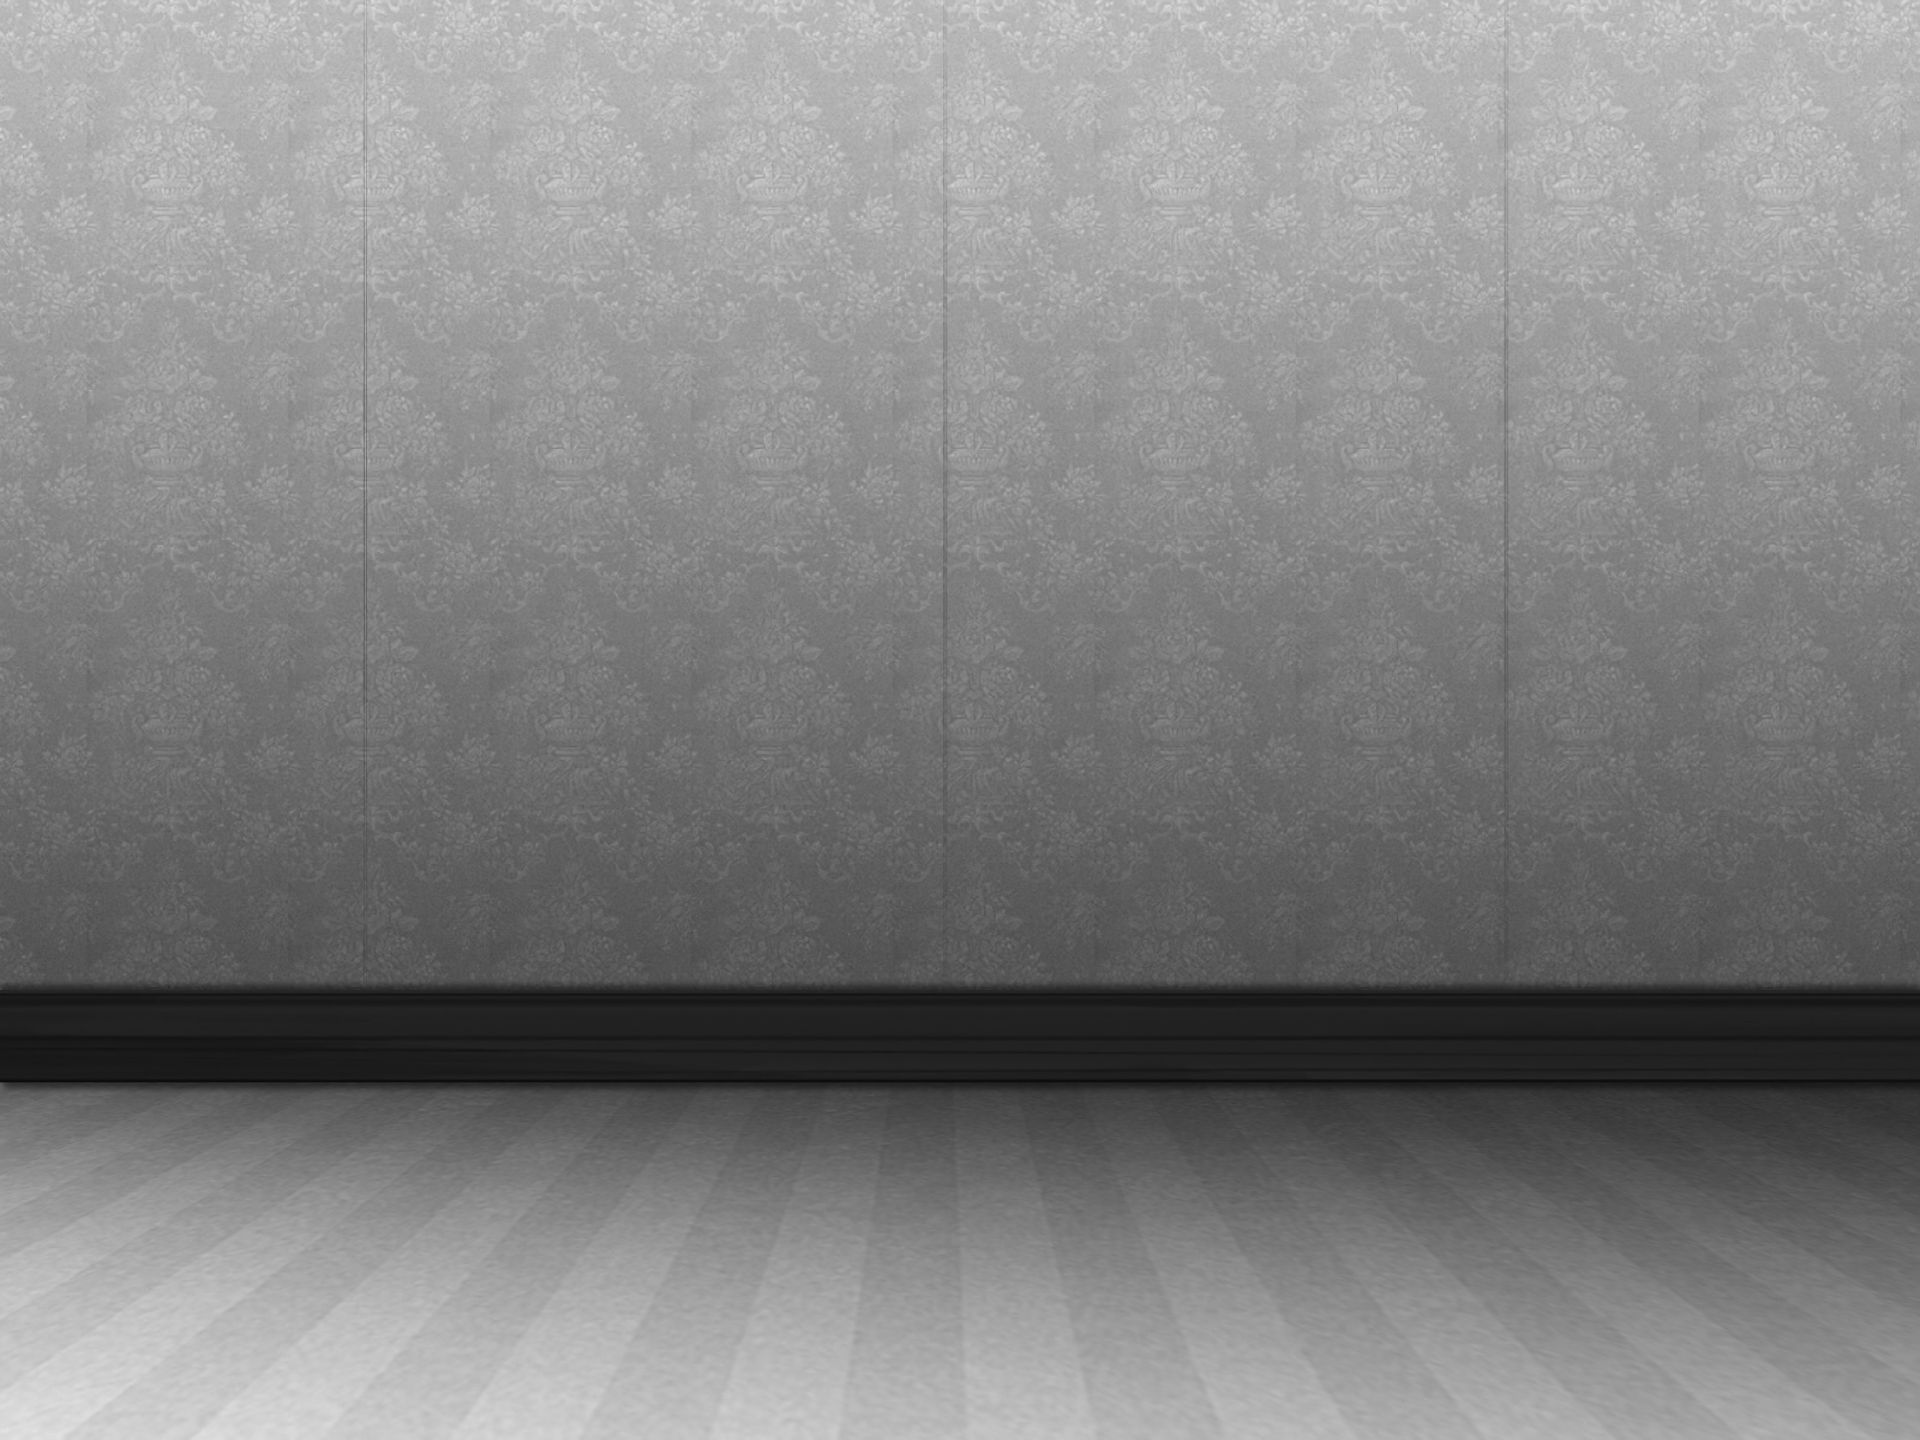 1920x1080 Background abstract, grey